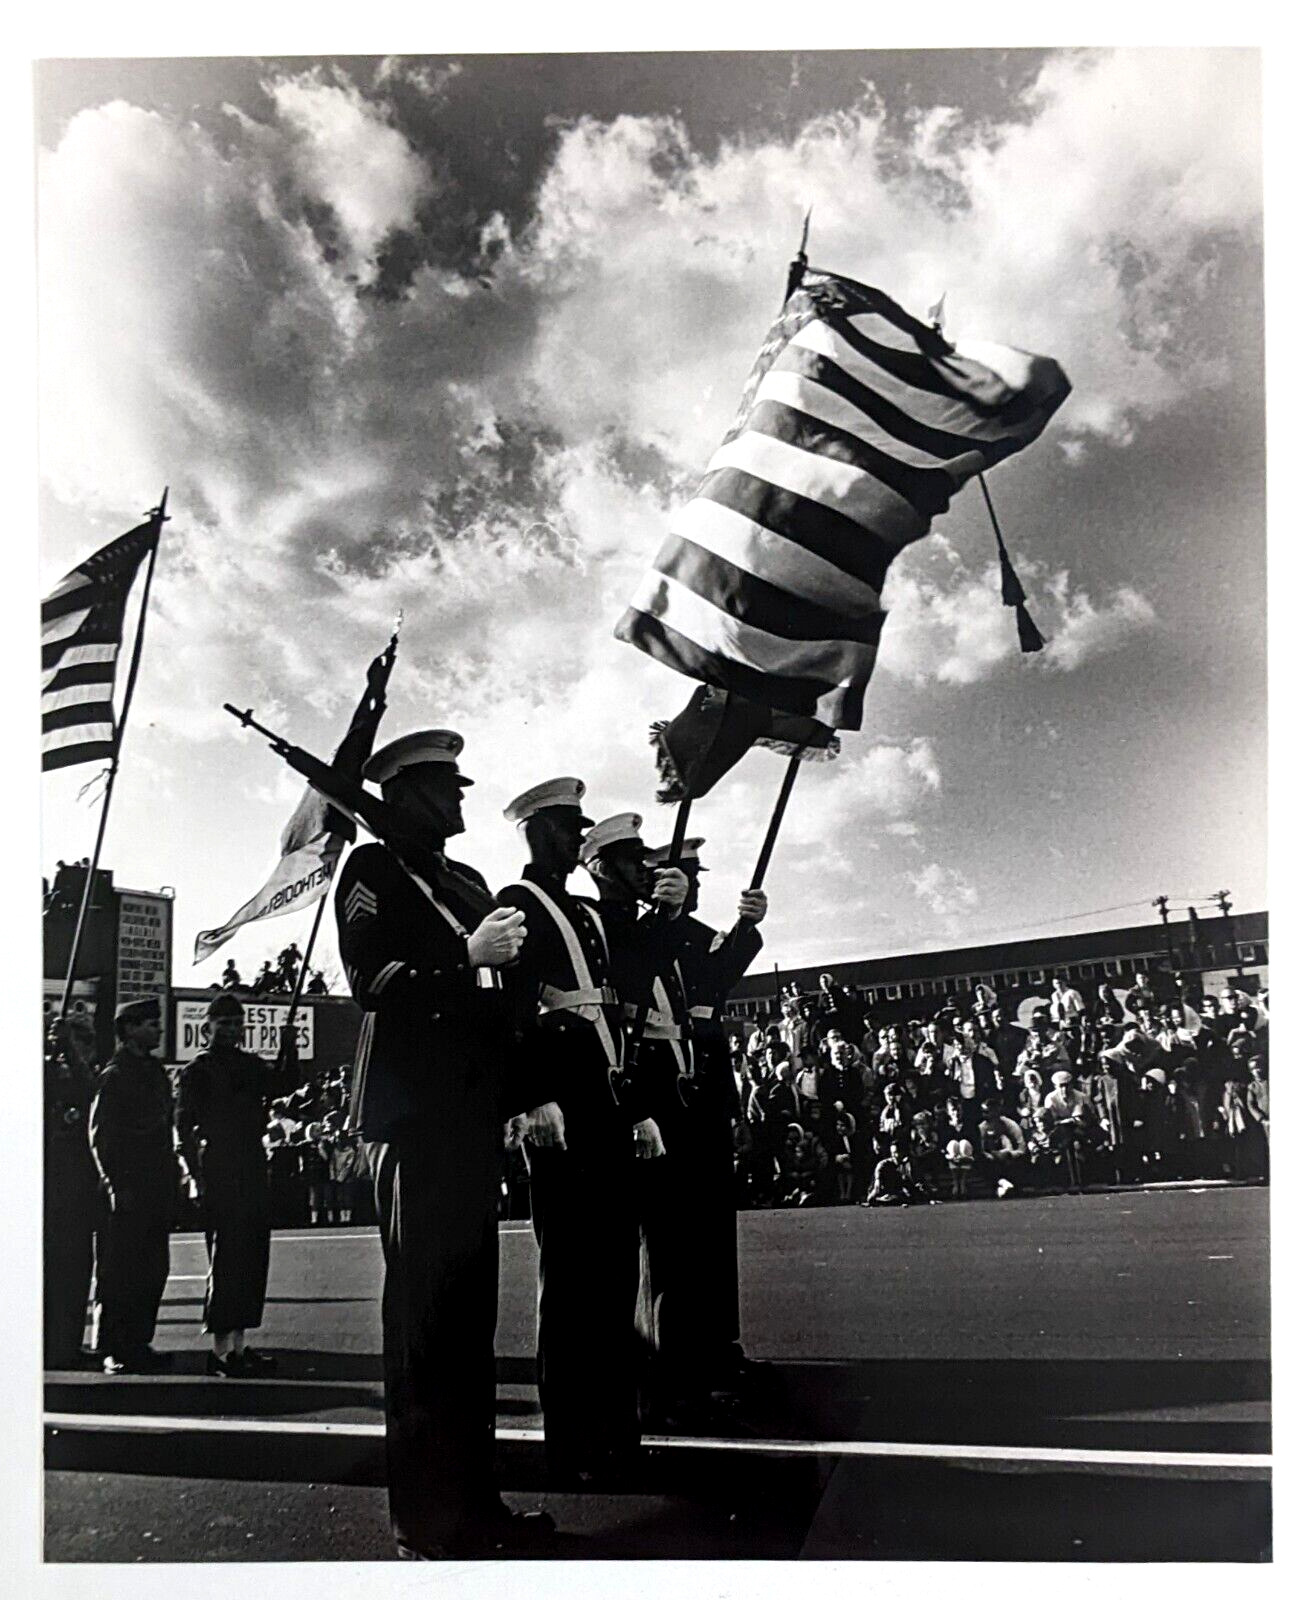 1962 US Marine Corp Parade American Flags Boy Scouts Crowd Vintage Press Photo